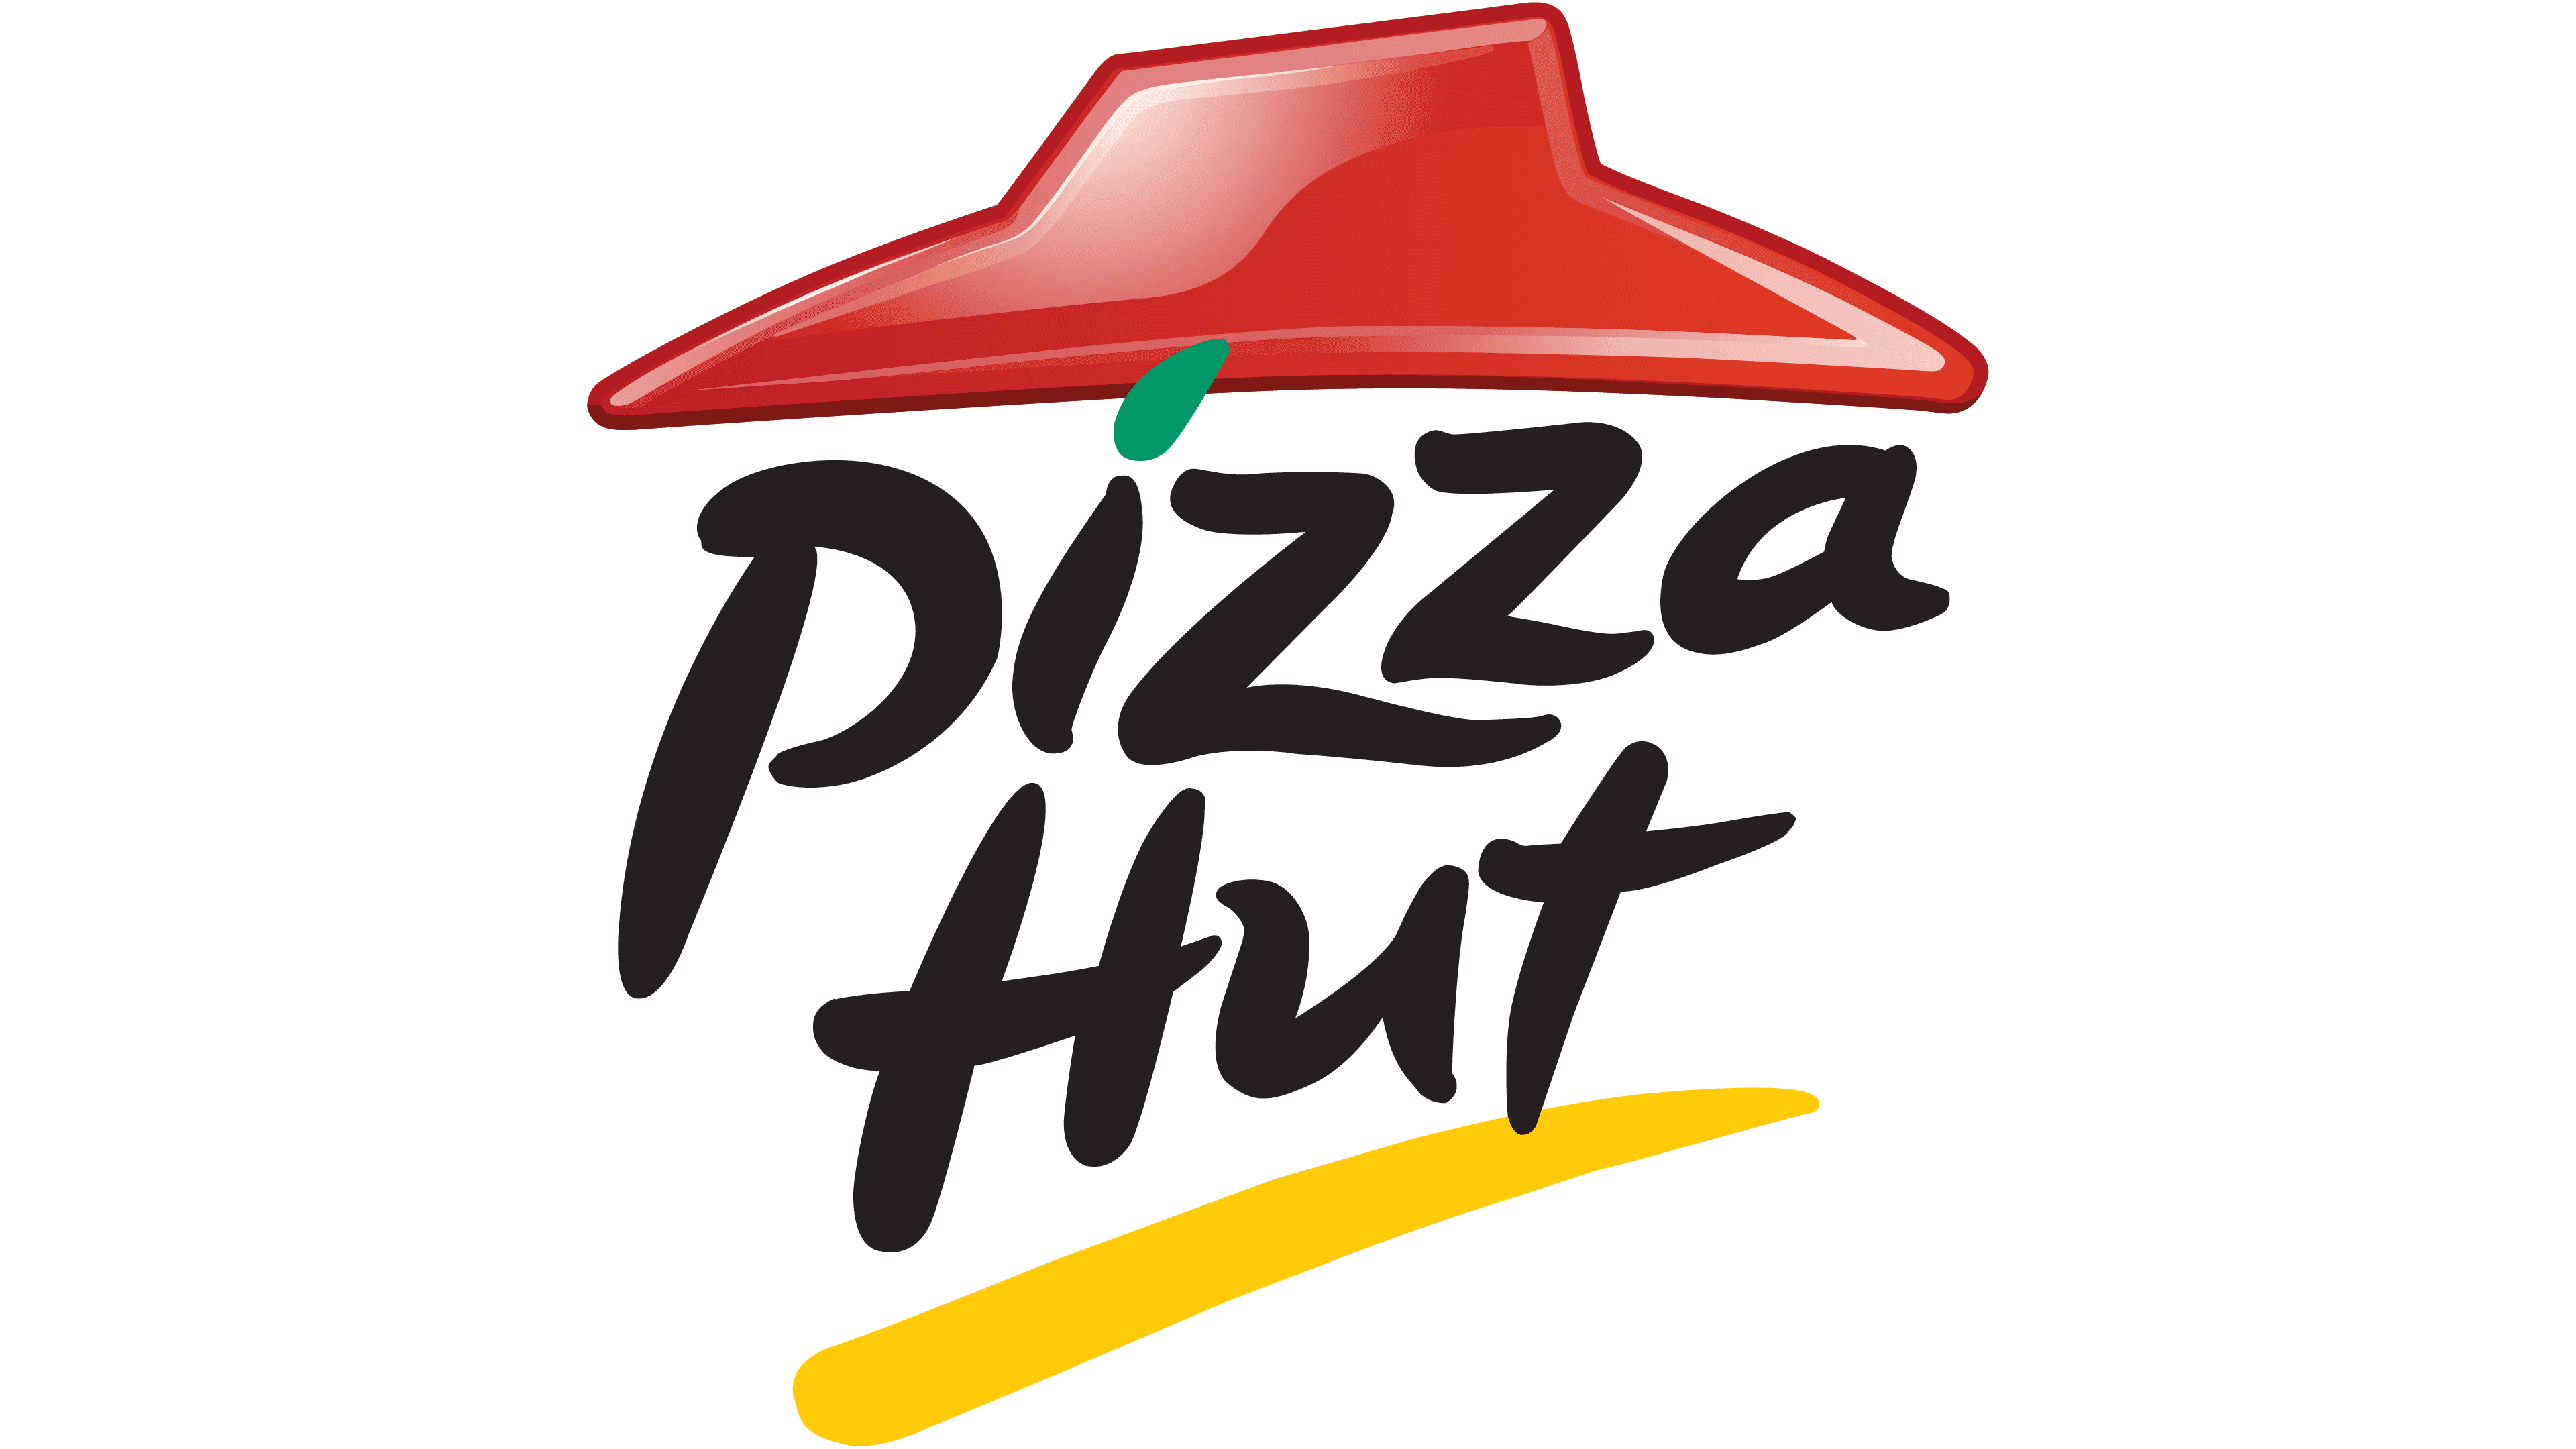 12 Inch Pizza Hut 3D Logo Sign, 3D Printed Reproduction wall sign  Collection. | eBay